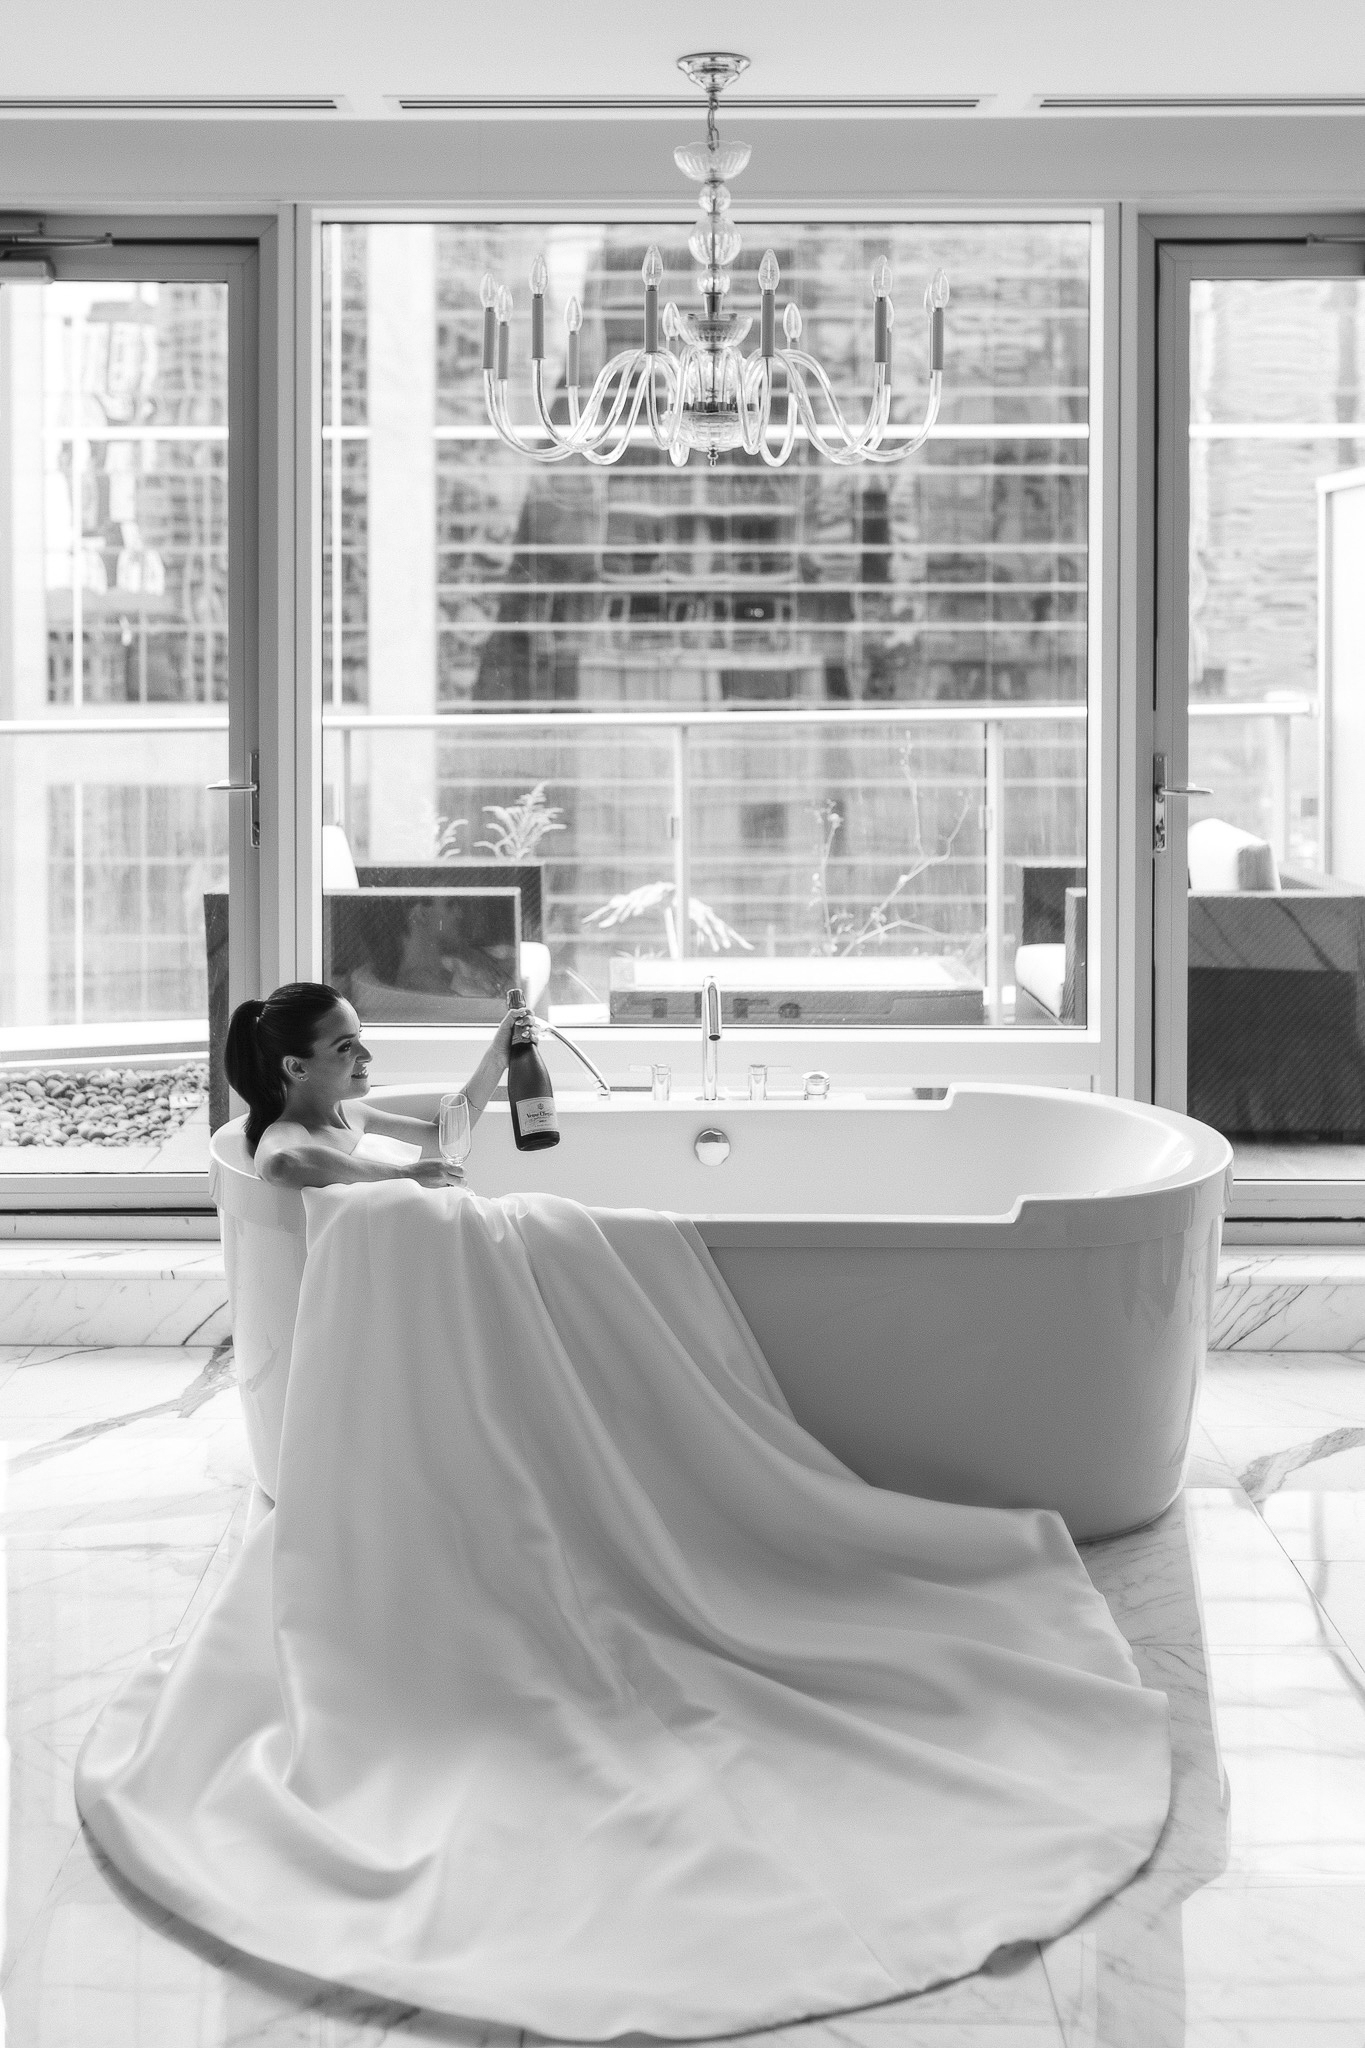 The bride in a wedding dress holding a bottle of champagne in a white bathtub, the dress hanging over the side of the tub.